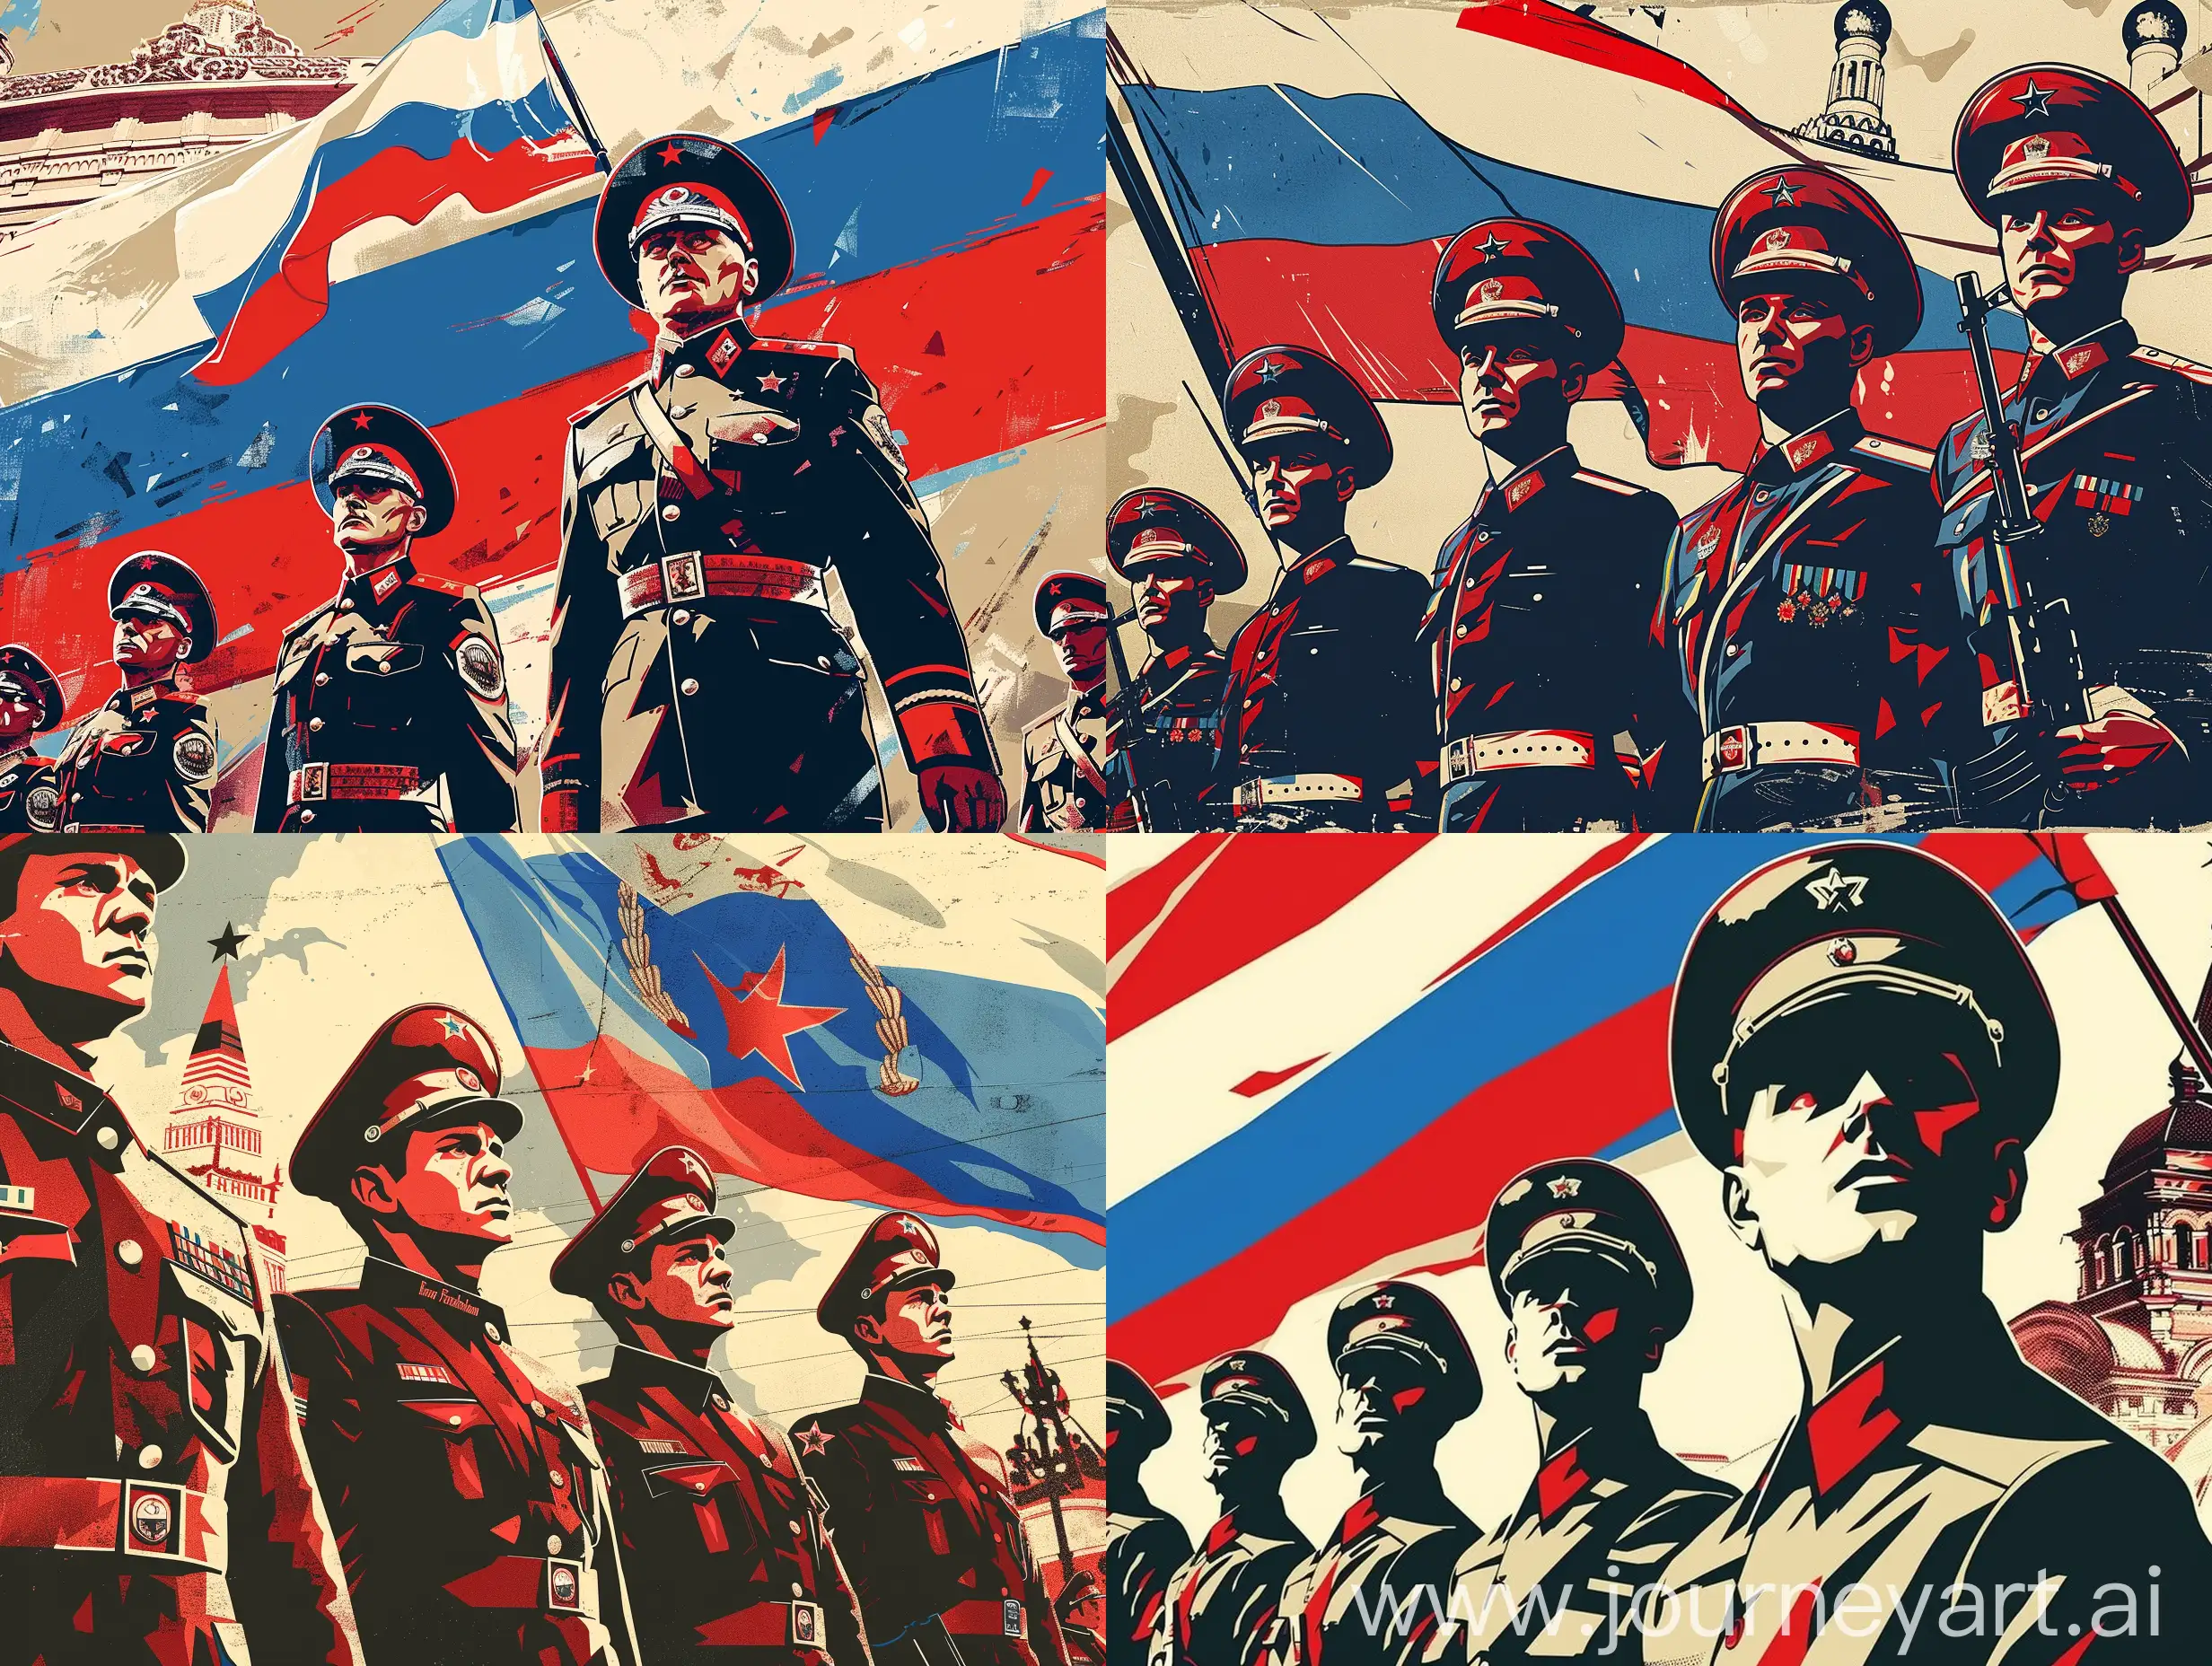 Heroic-Russian-Soldiers-Celebrate-Defender-of-the-Fatherland-Day